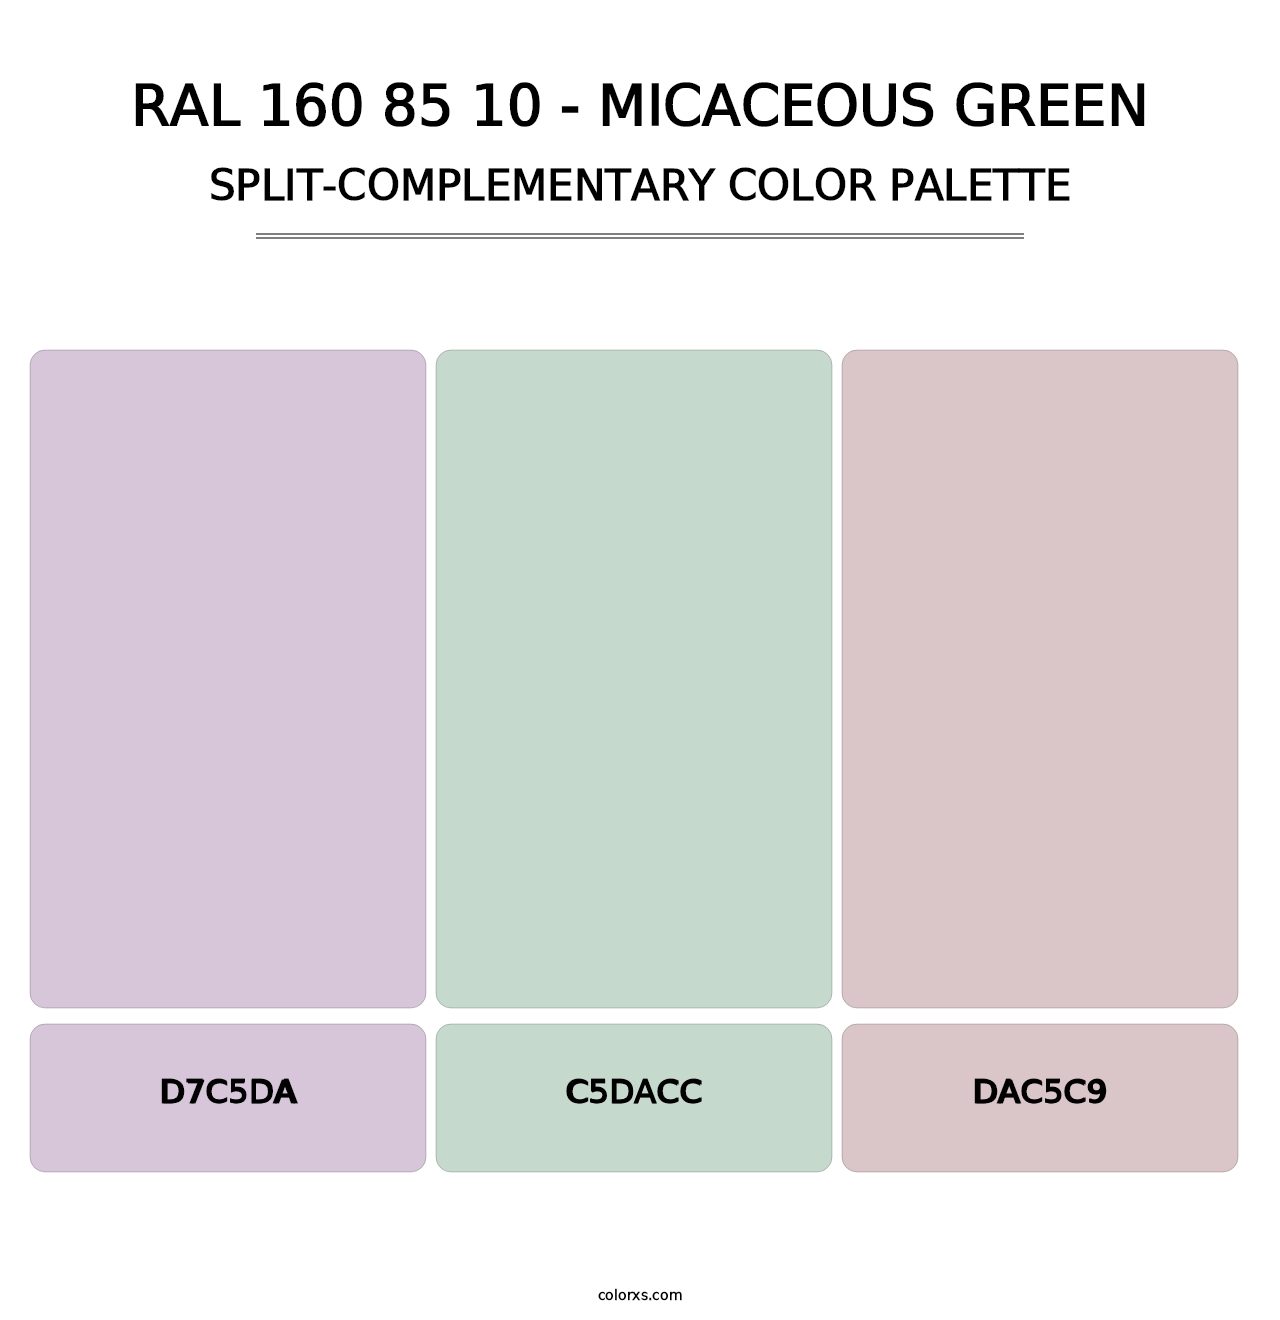 RAL 160 85 10 - Micaceous Green - Split-Complementary Color Palette